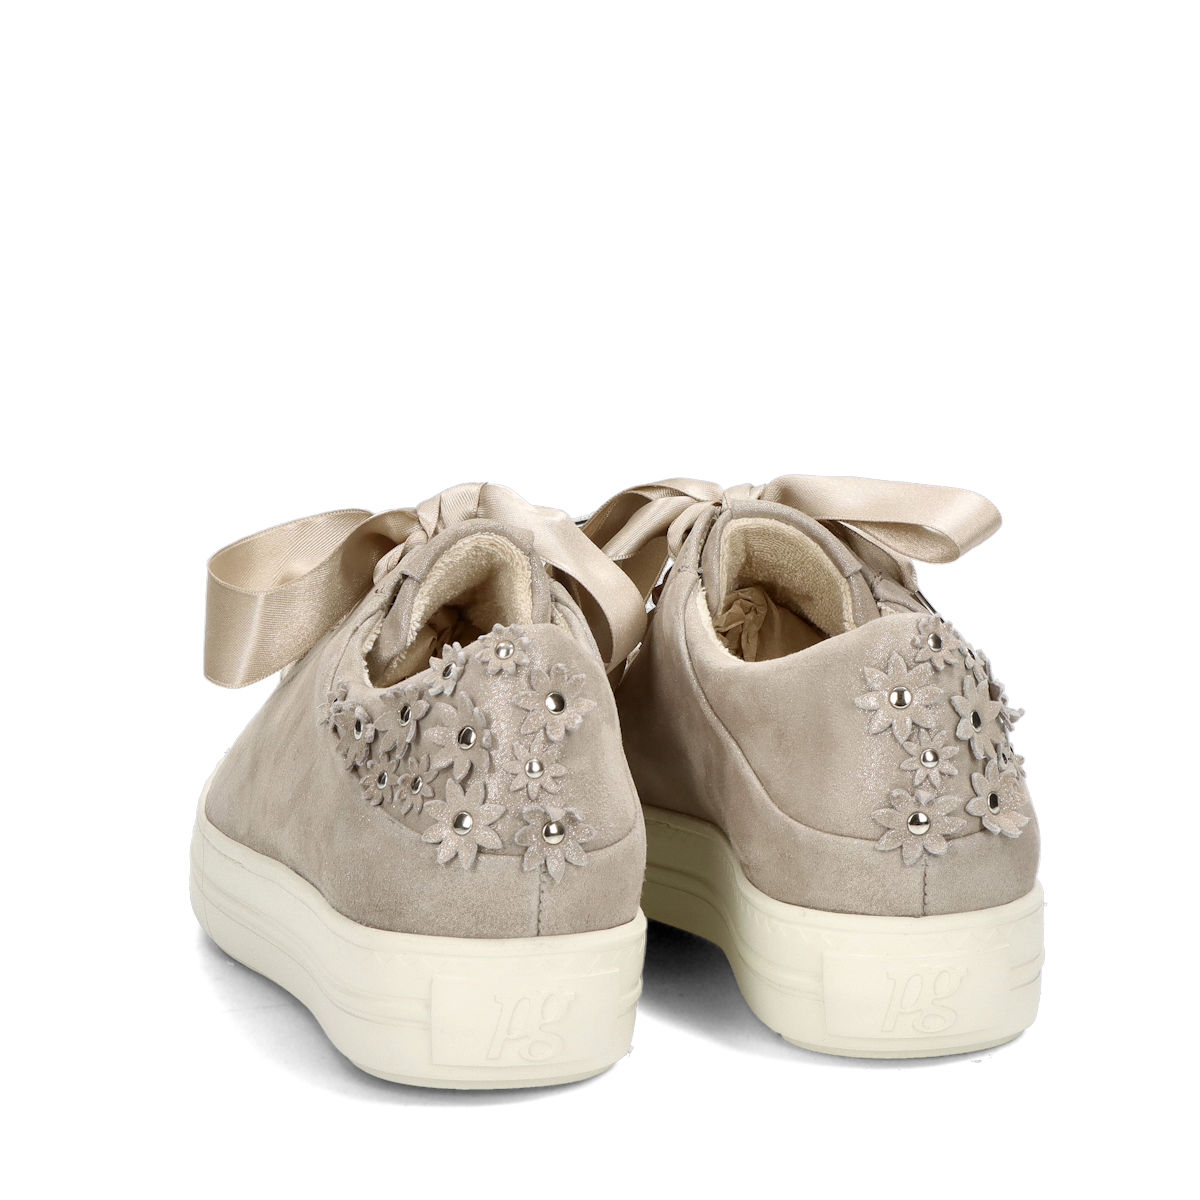 Paul Green Women's Pale Gold Platform Sneakers Size 5 (UK), 7.5 (US) -  Prime Shoes and More